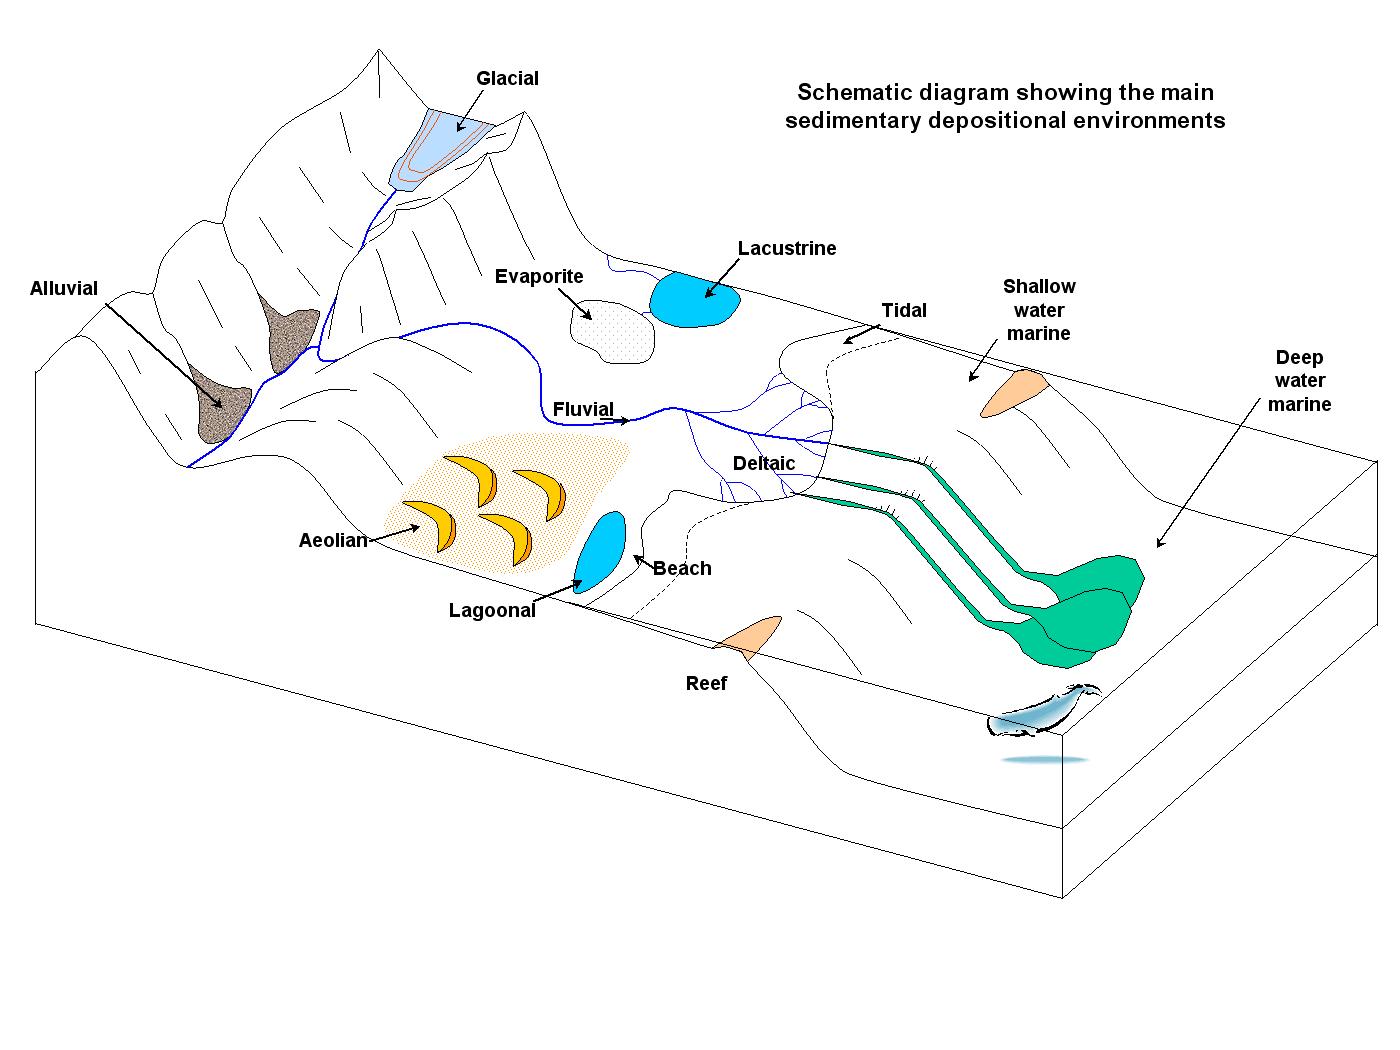 Block diagram of various depositional environments; there is a mountain range with two environments labeled Alluvial and Glacial; at the base of the mountains is flat land with four environments labeled Aeolian, Fluvial, Evaporite, and Lacustrine; the flat land ends at the shoreline which has four environments labeled Lagoonal, Beach, Deltaic, and Tidal; from the shoreline into the ocean there's a continental shelf, the top of which has two environments labeled Reef and Shallow water marine; and at the base of the continental shelf is a deep ocean basin with one environment labeled Deep water marine.